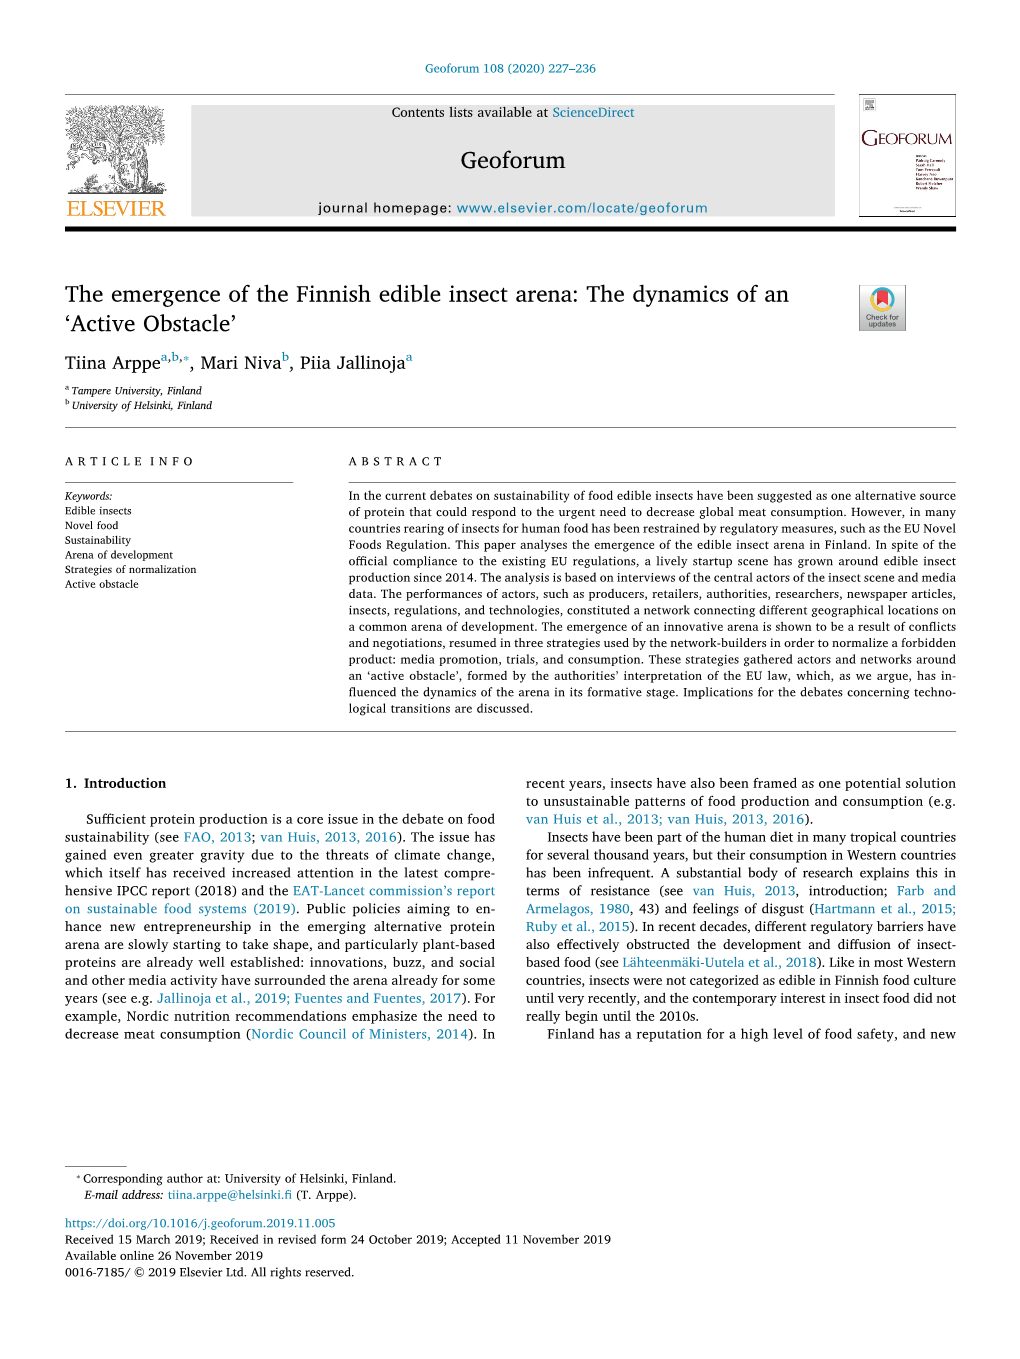 The Emergence of the Finnish Edible Insect Arena the Dynamics of An